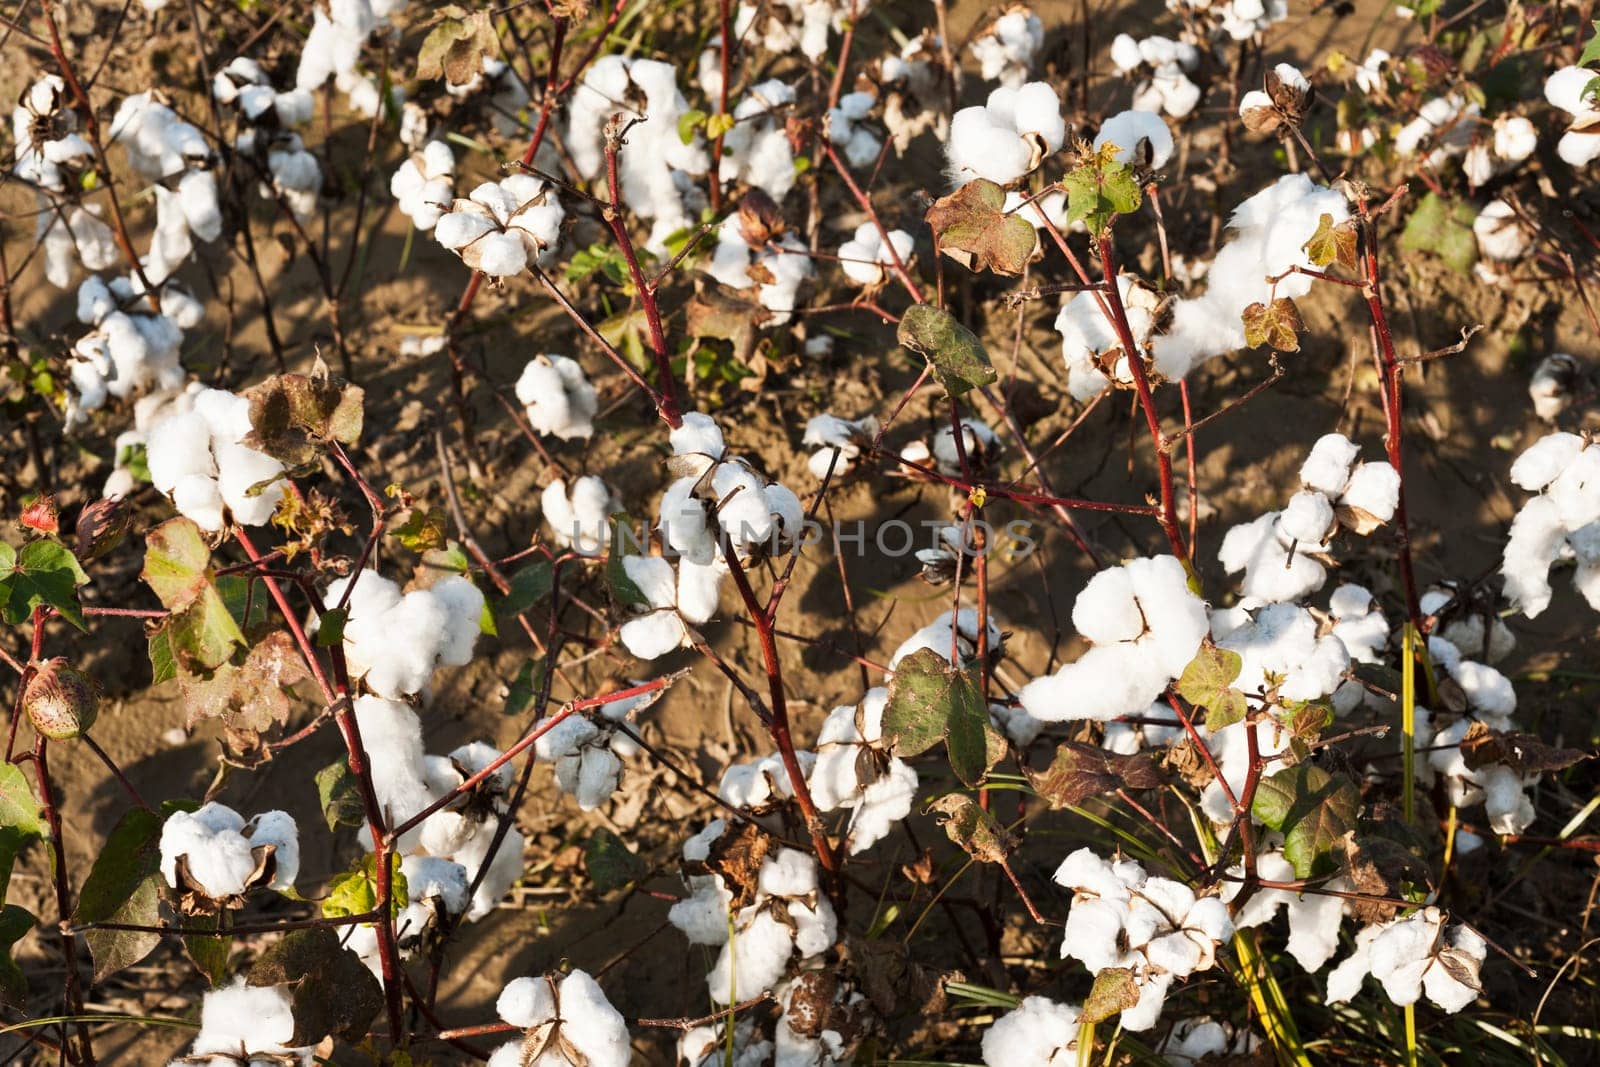 White ripe cotton field ready for harvest